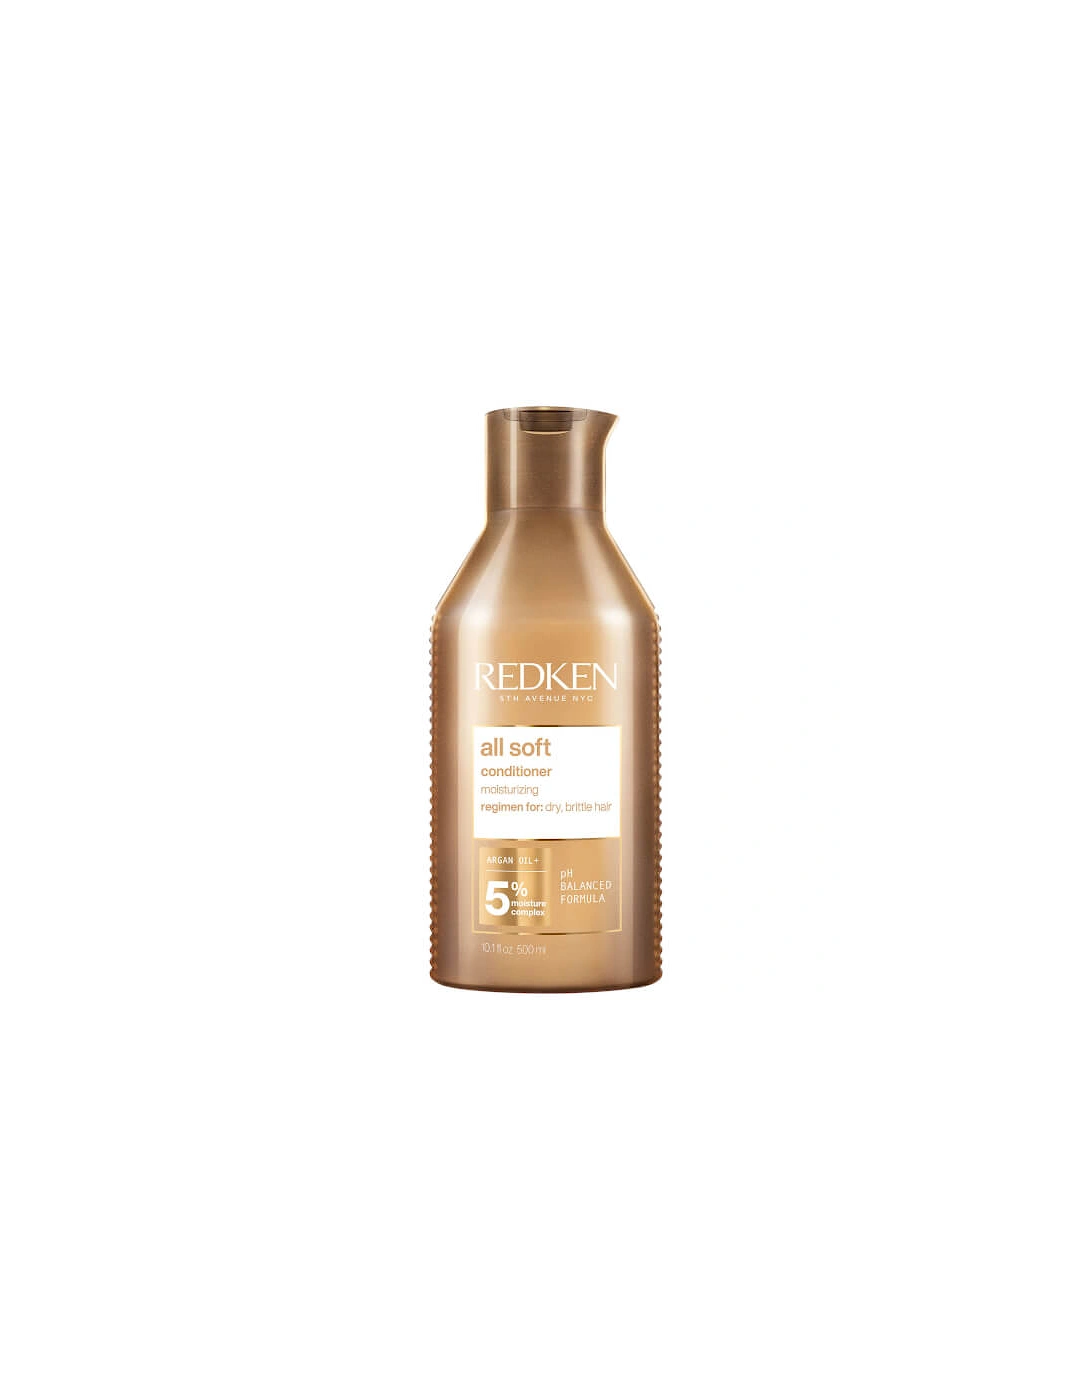 All Soft Conditioner For Dry, Brittle Hair 500ml - Redken, 2 of 1